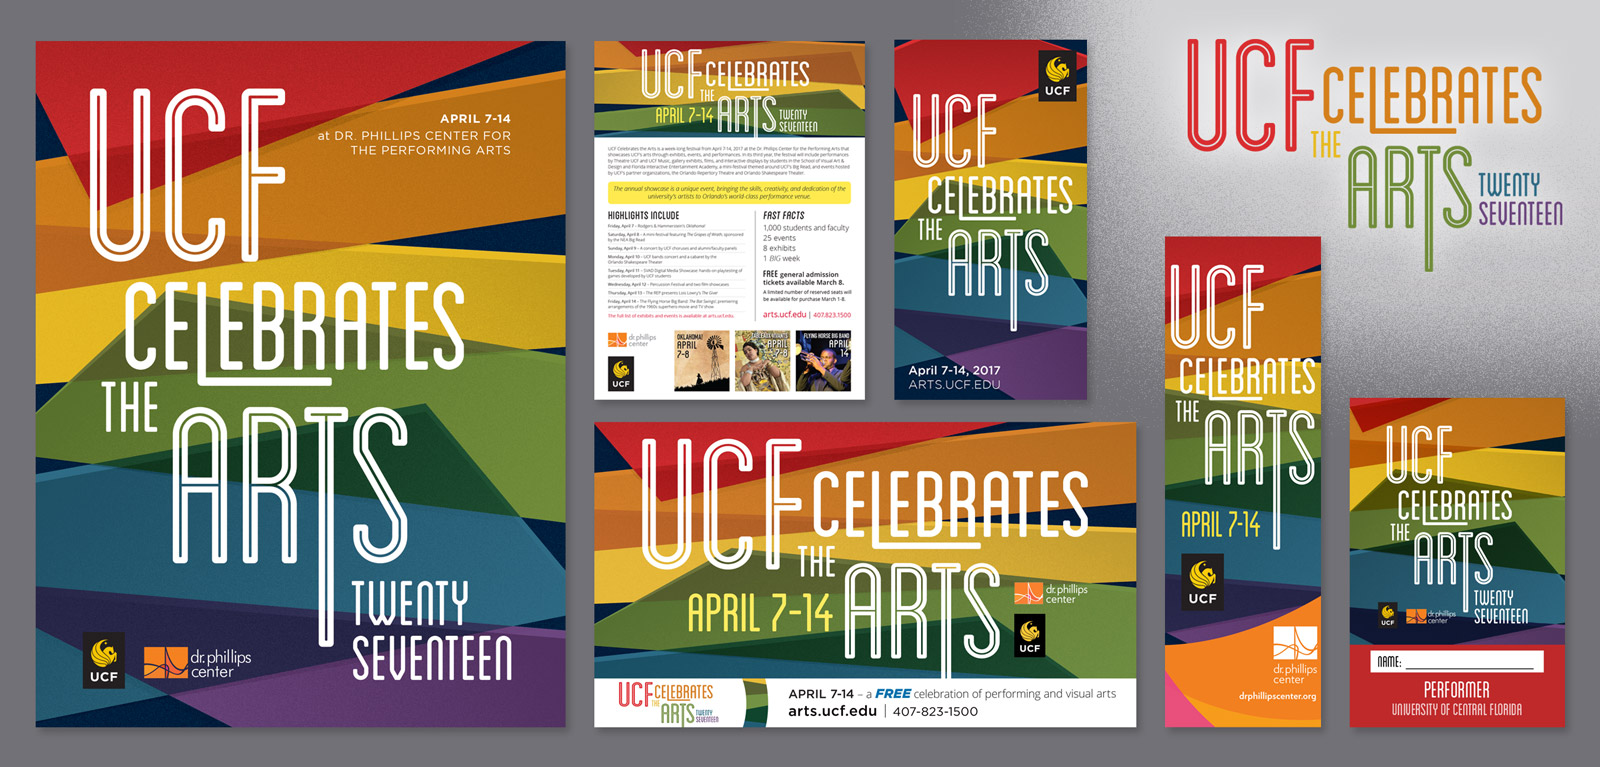 Publication examples from UCF Celebrates the Arts 2017